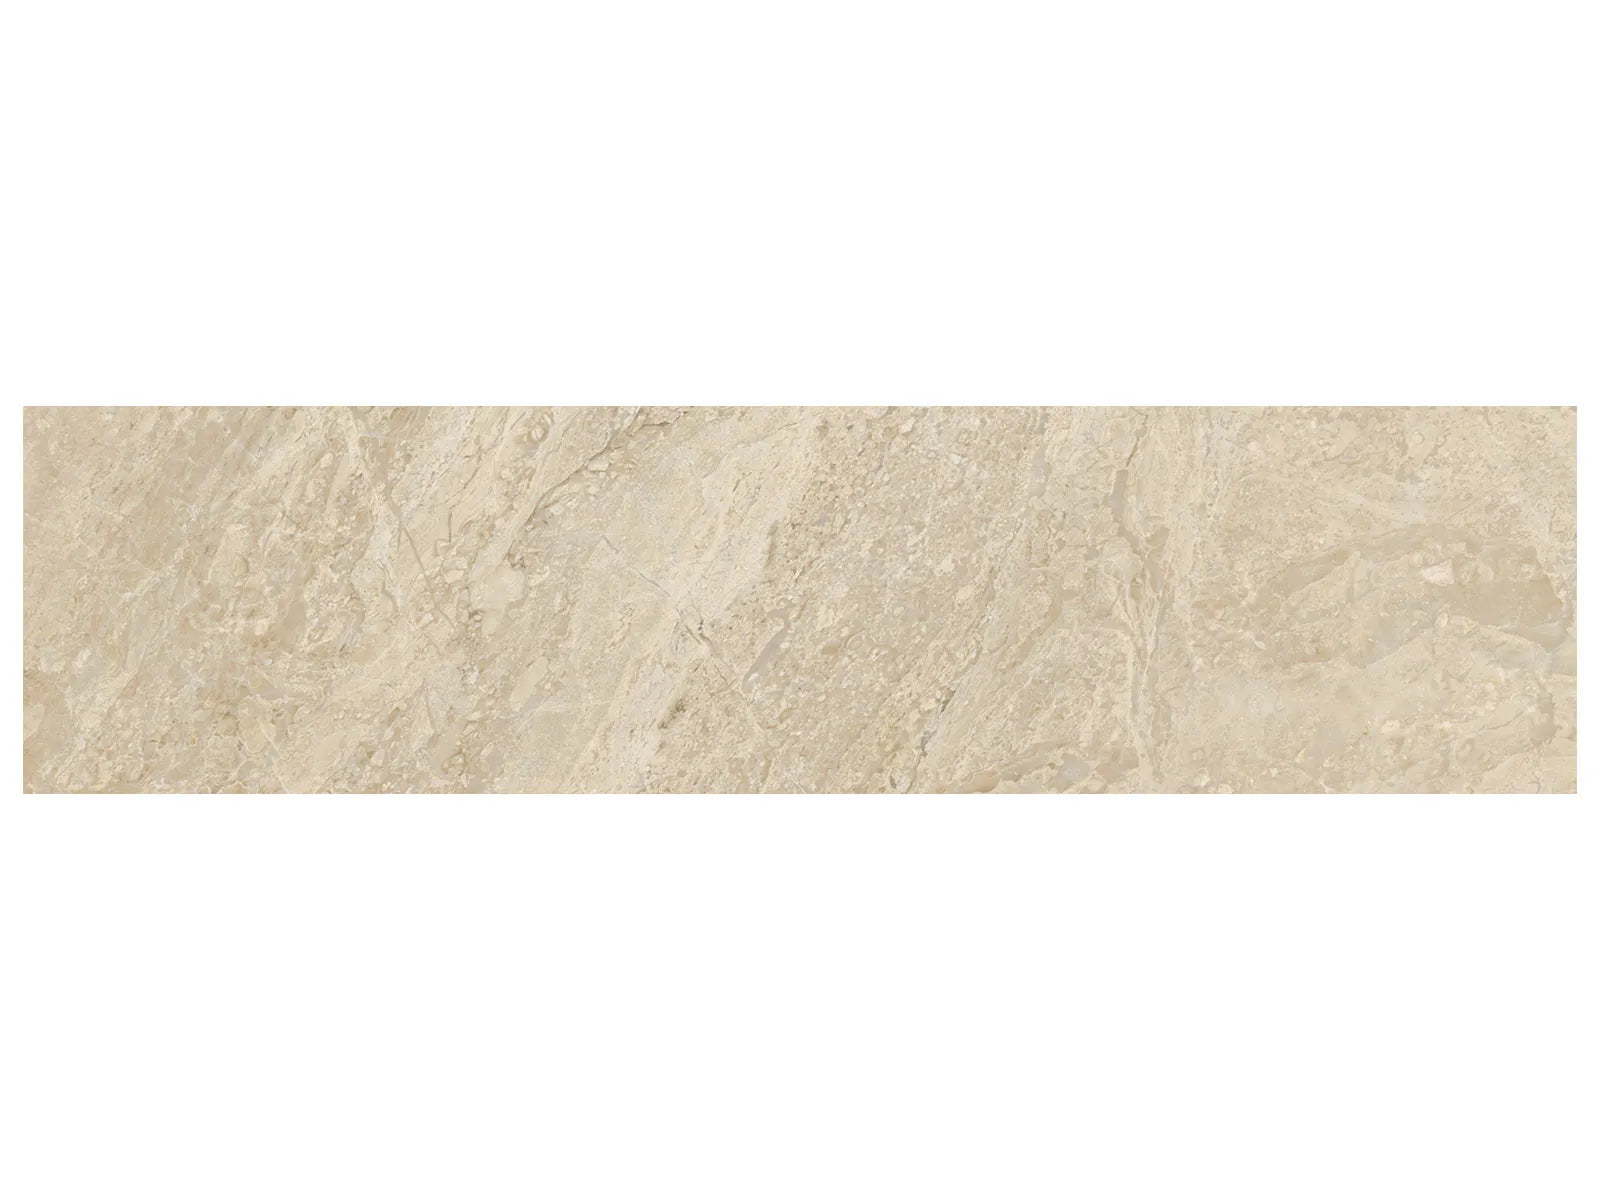 IMPERO REALE: Marble Field Tile (12¹⁄₁₆"X2¹⁵⁄₁₆"X⅜" | Polished)